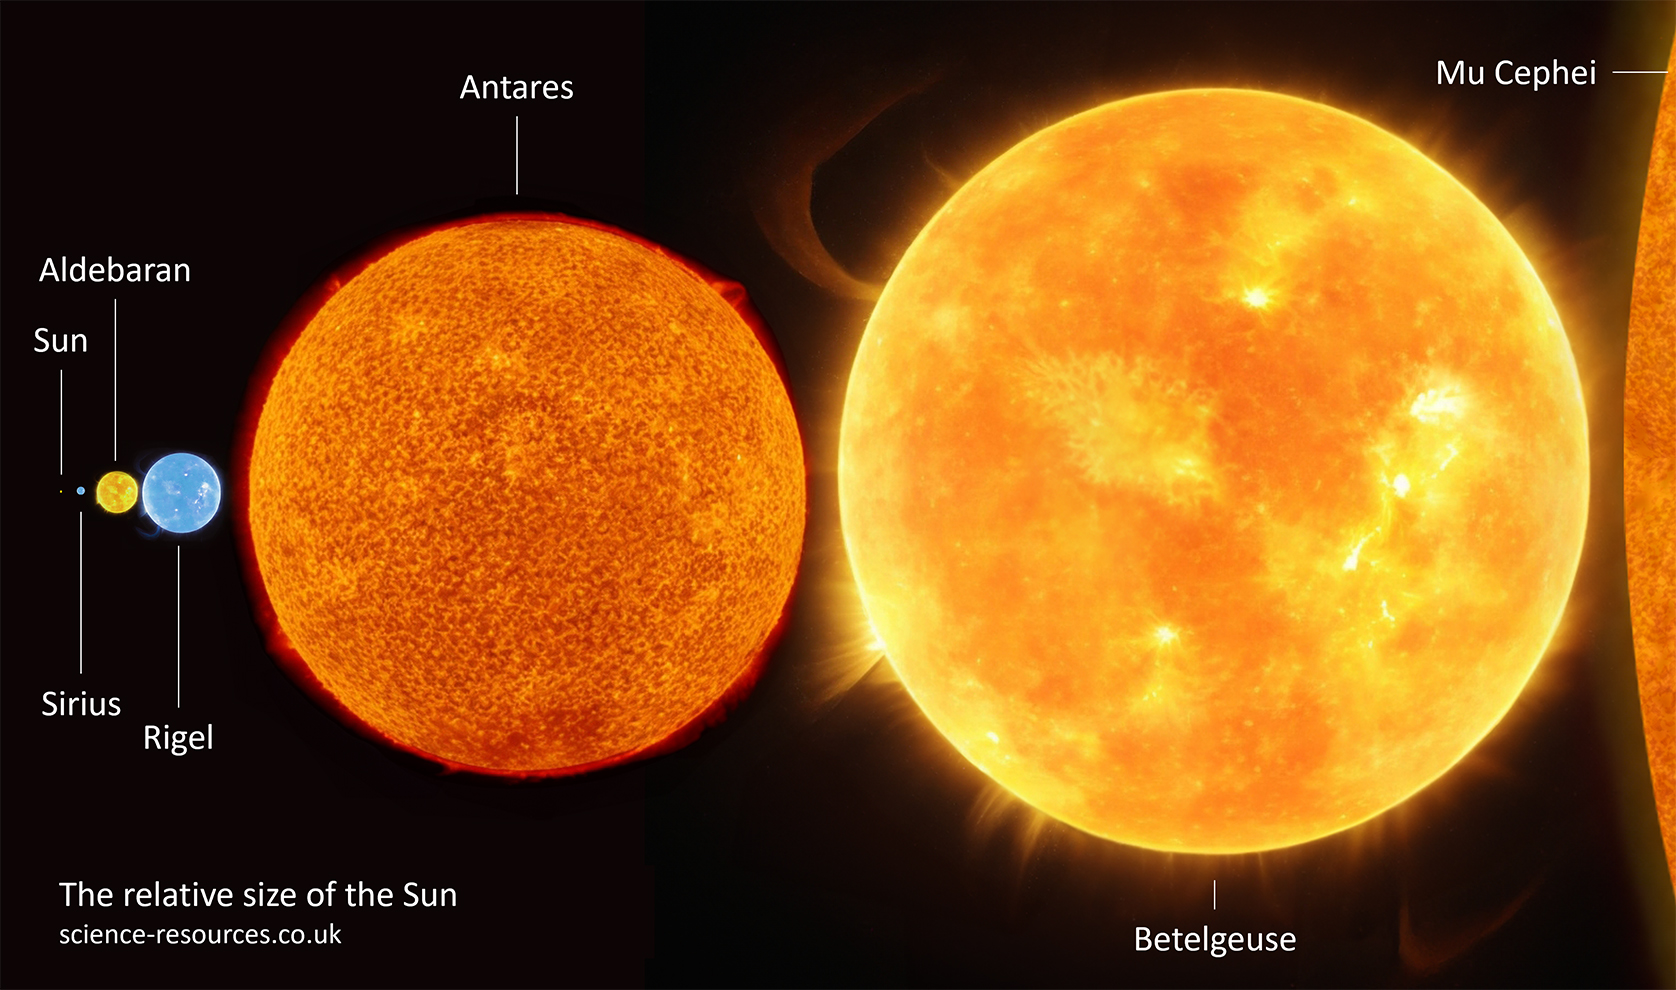 Relative size of our Sun compared to other stars. From left to right (in order of size from smallest to largest): Sun, Sirius, Aldebaran, Rigel, Antares, Betelgeuse, Mu Cephei. In this image, our Sun is just a tiny dot compared to the giant and supergiant stars.